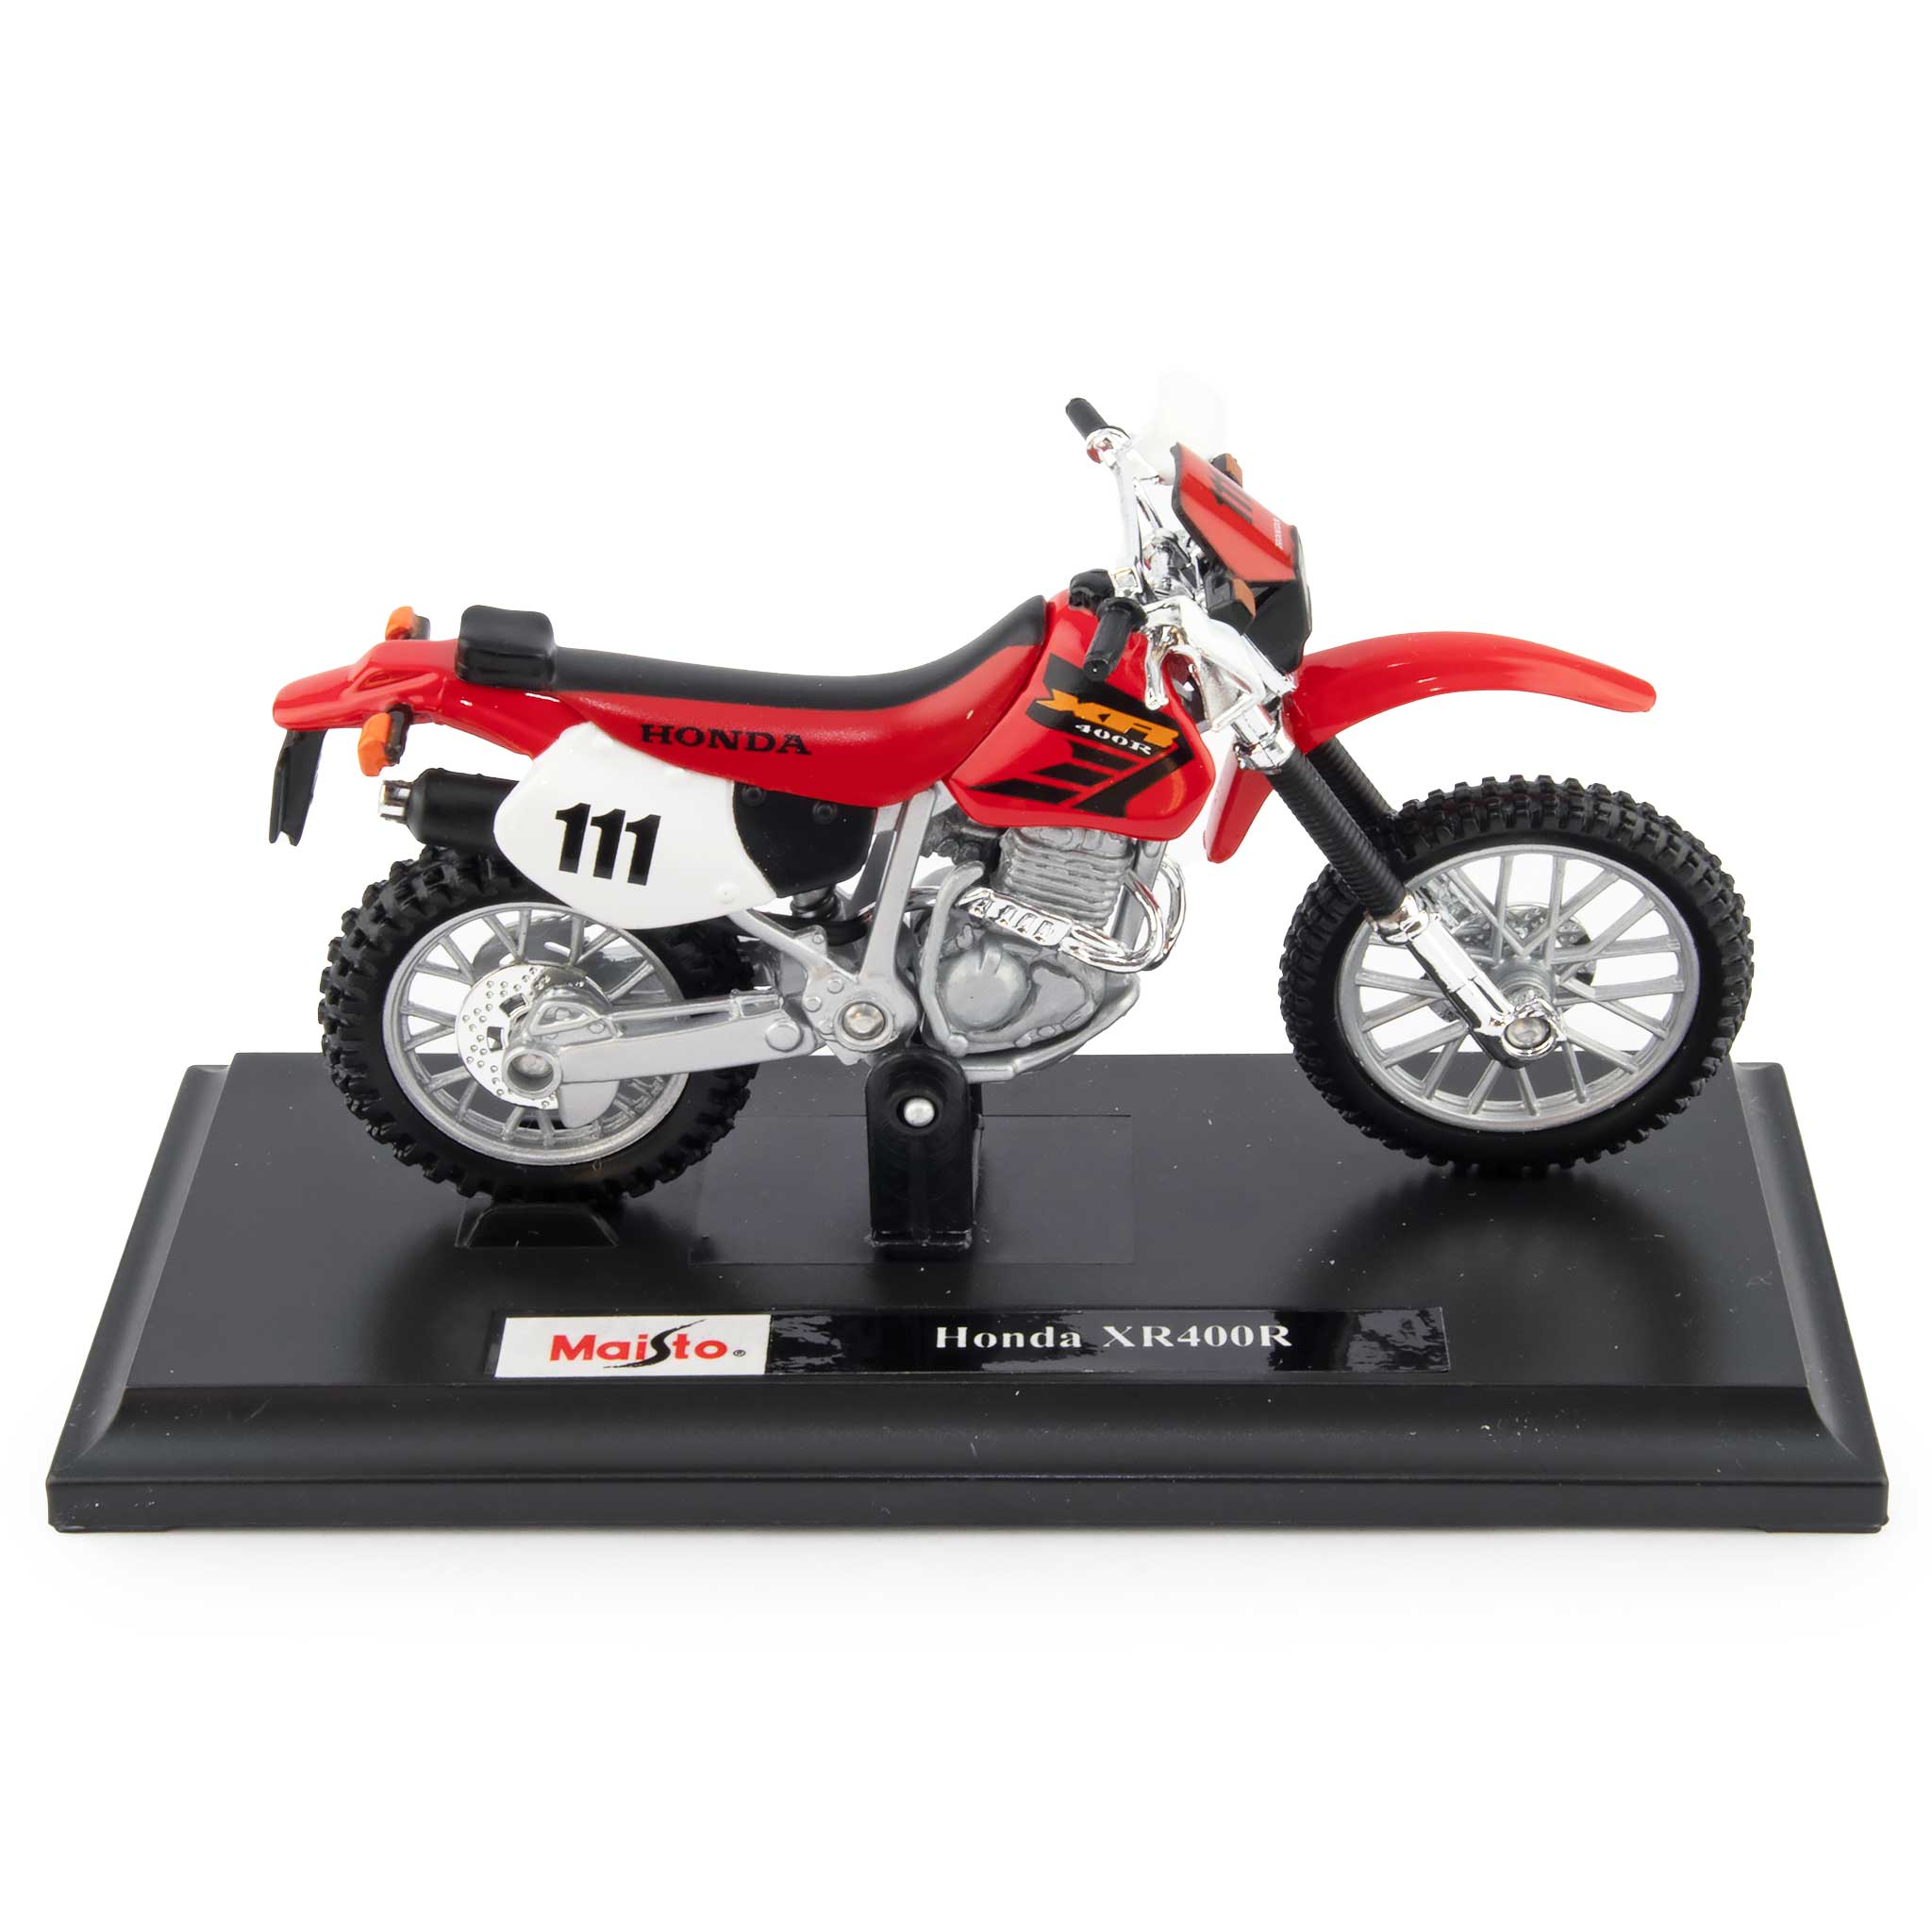 Honda XR400R Diecast Model Motorcycle red - 1:18 scale-Maisto-Diecast Model Centre